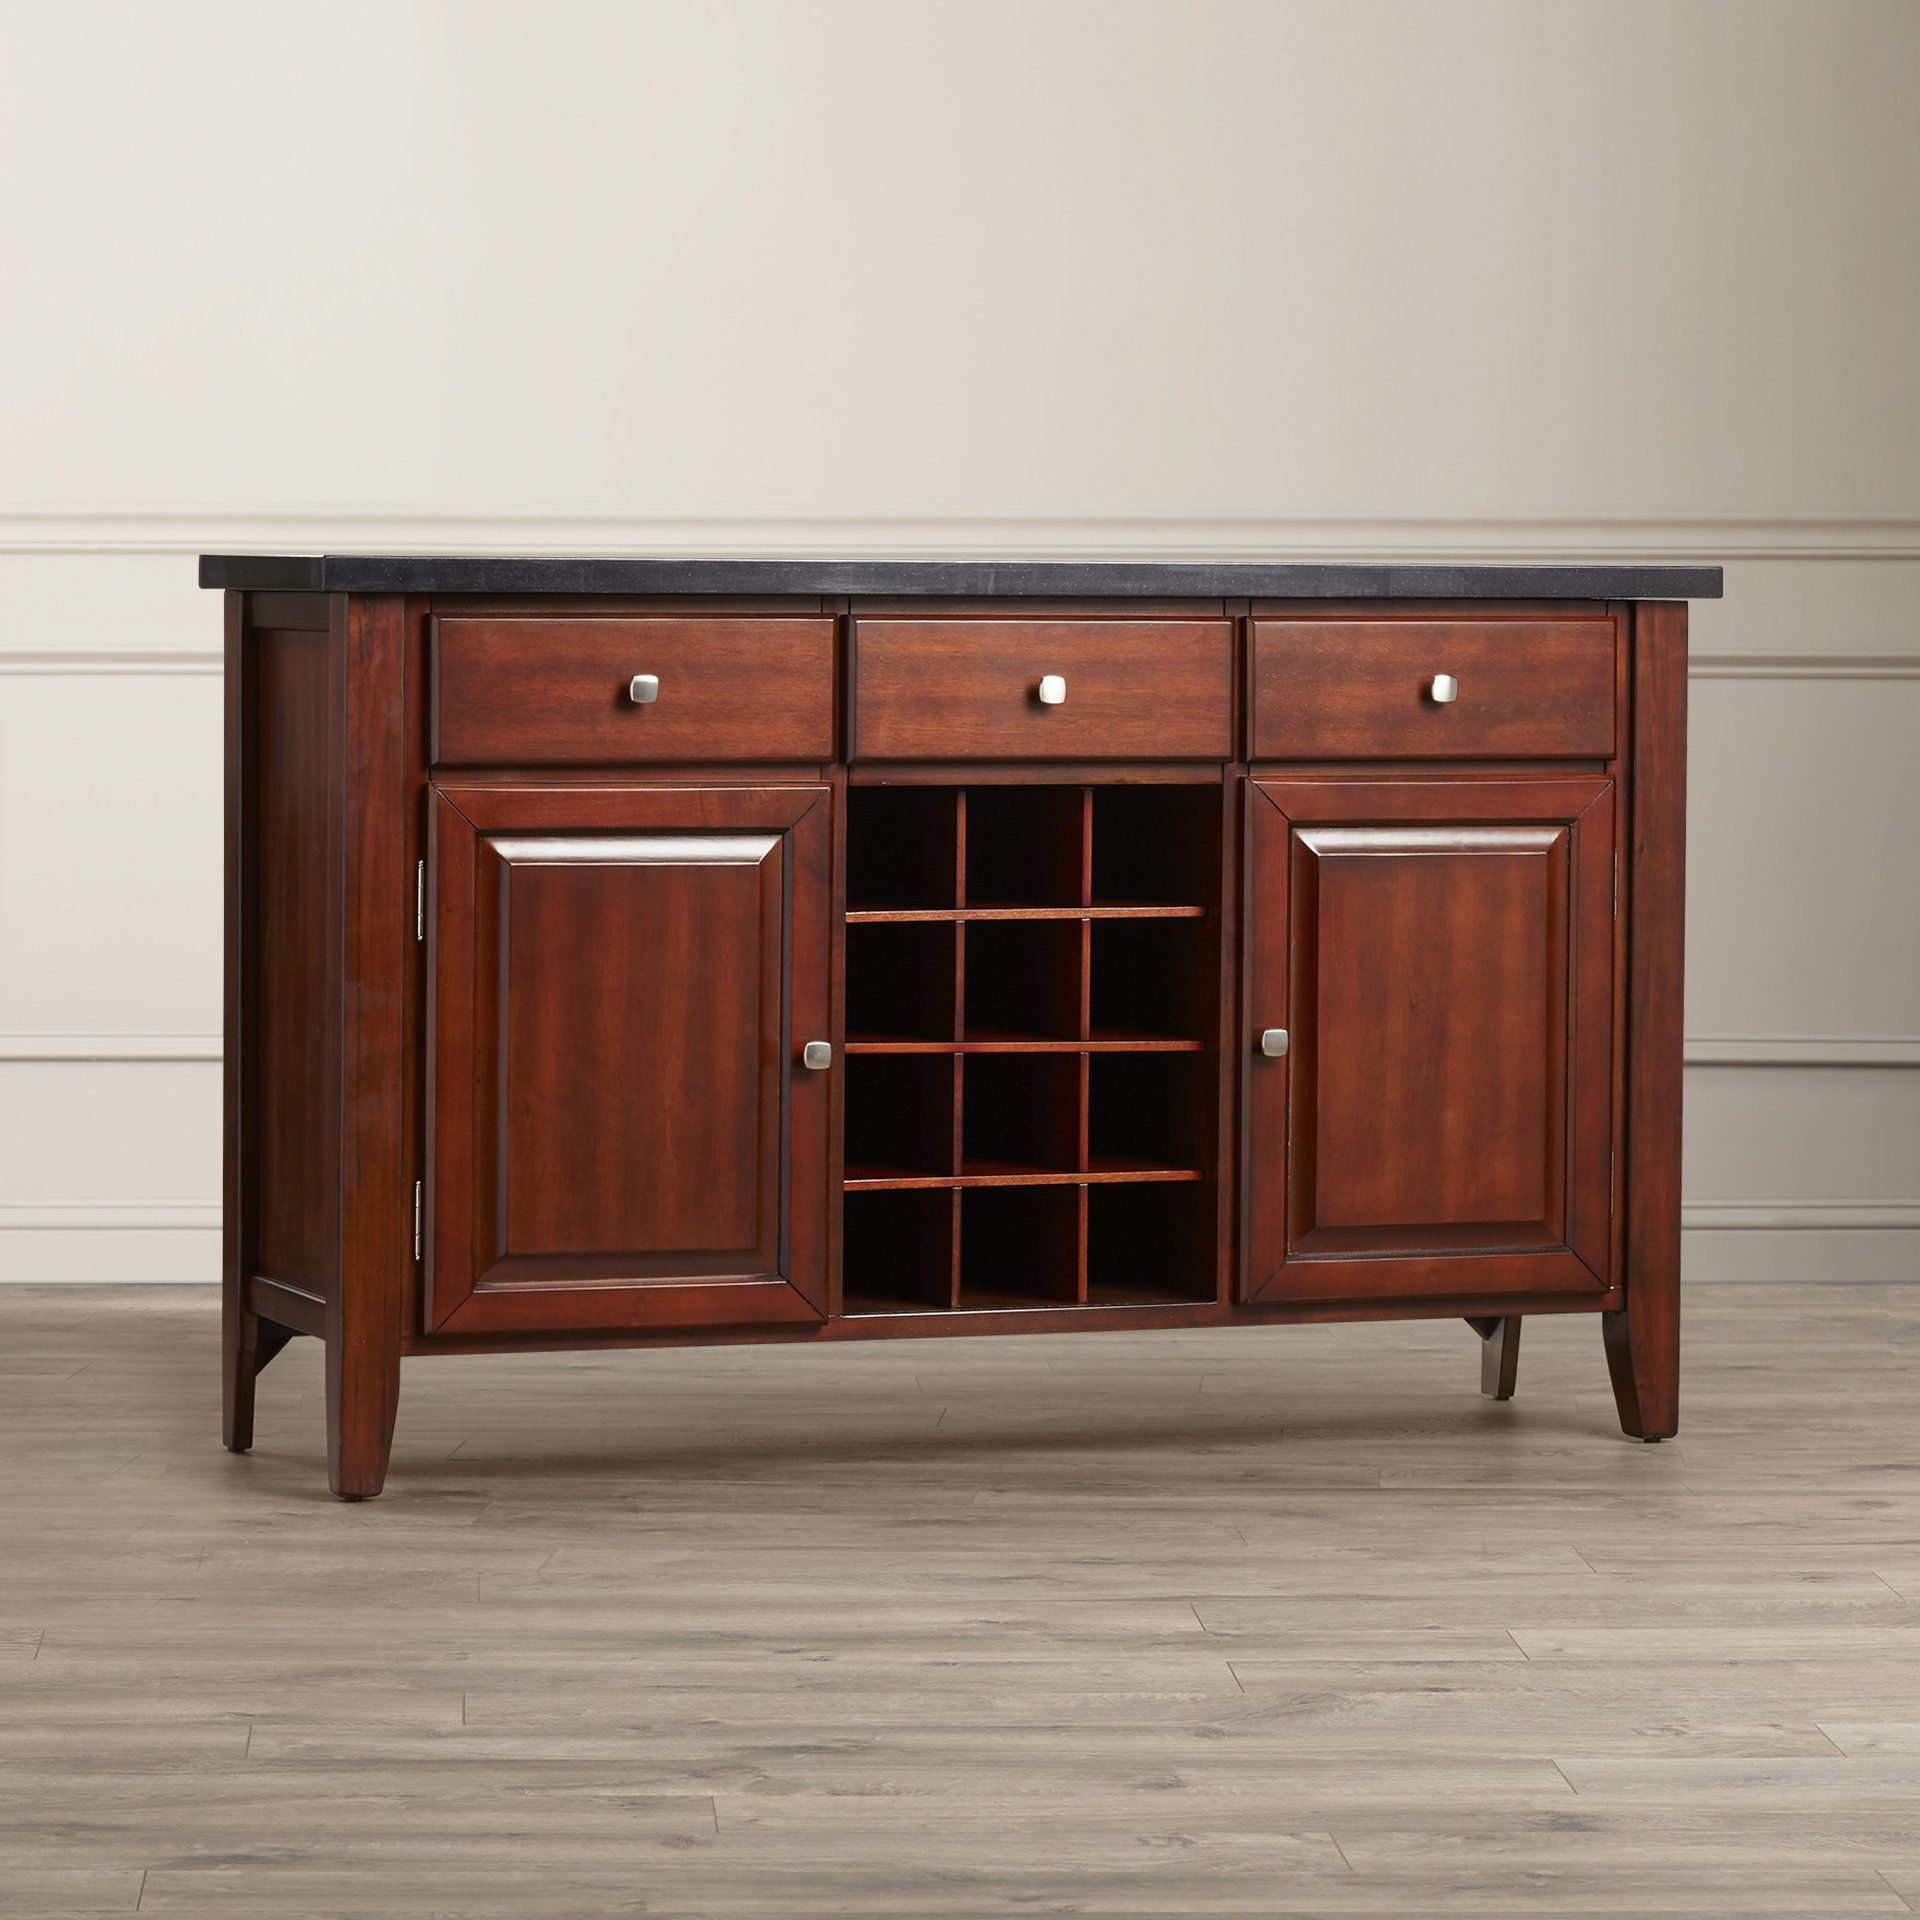 2020 Weinberger Sideboards Intended For Cabinet Equipped Marble & Granite Sideboards & Buffets You (View 6 of 20)